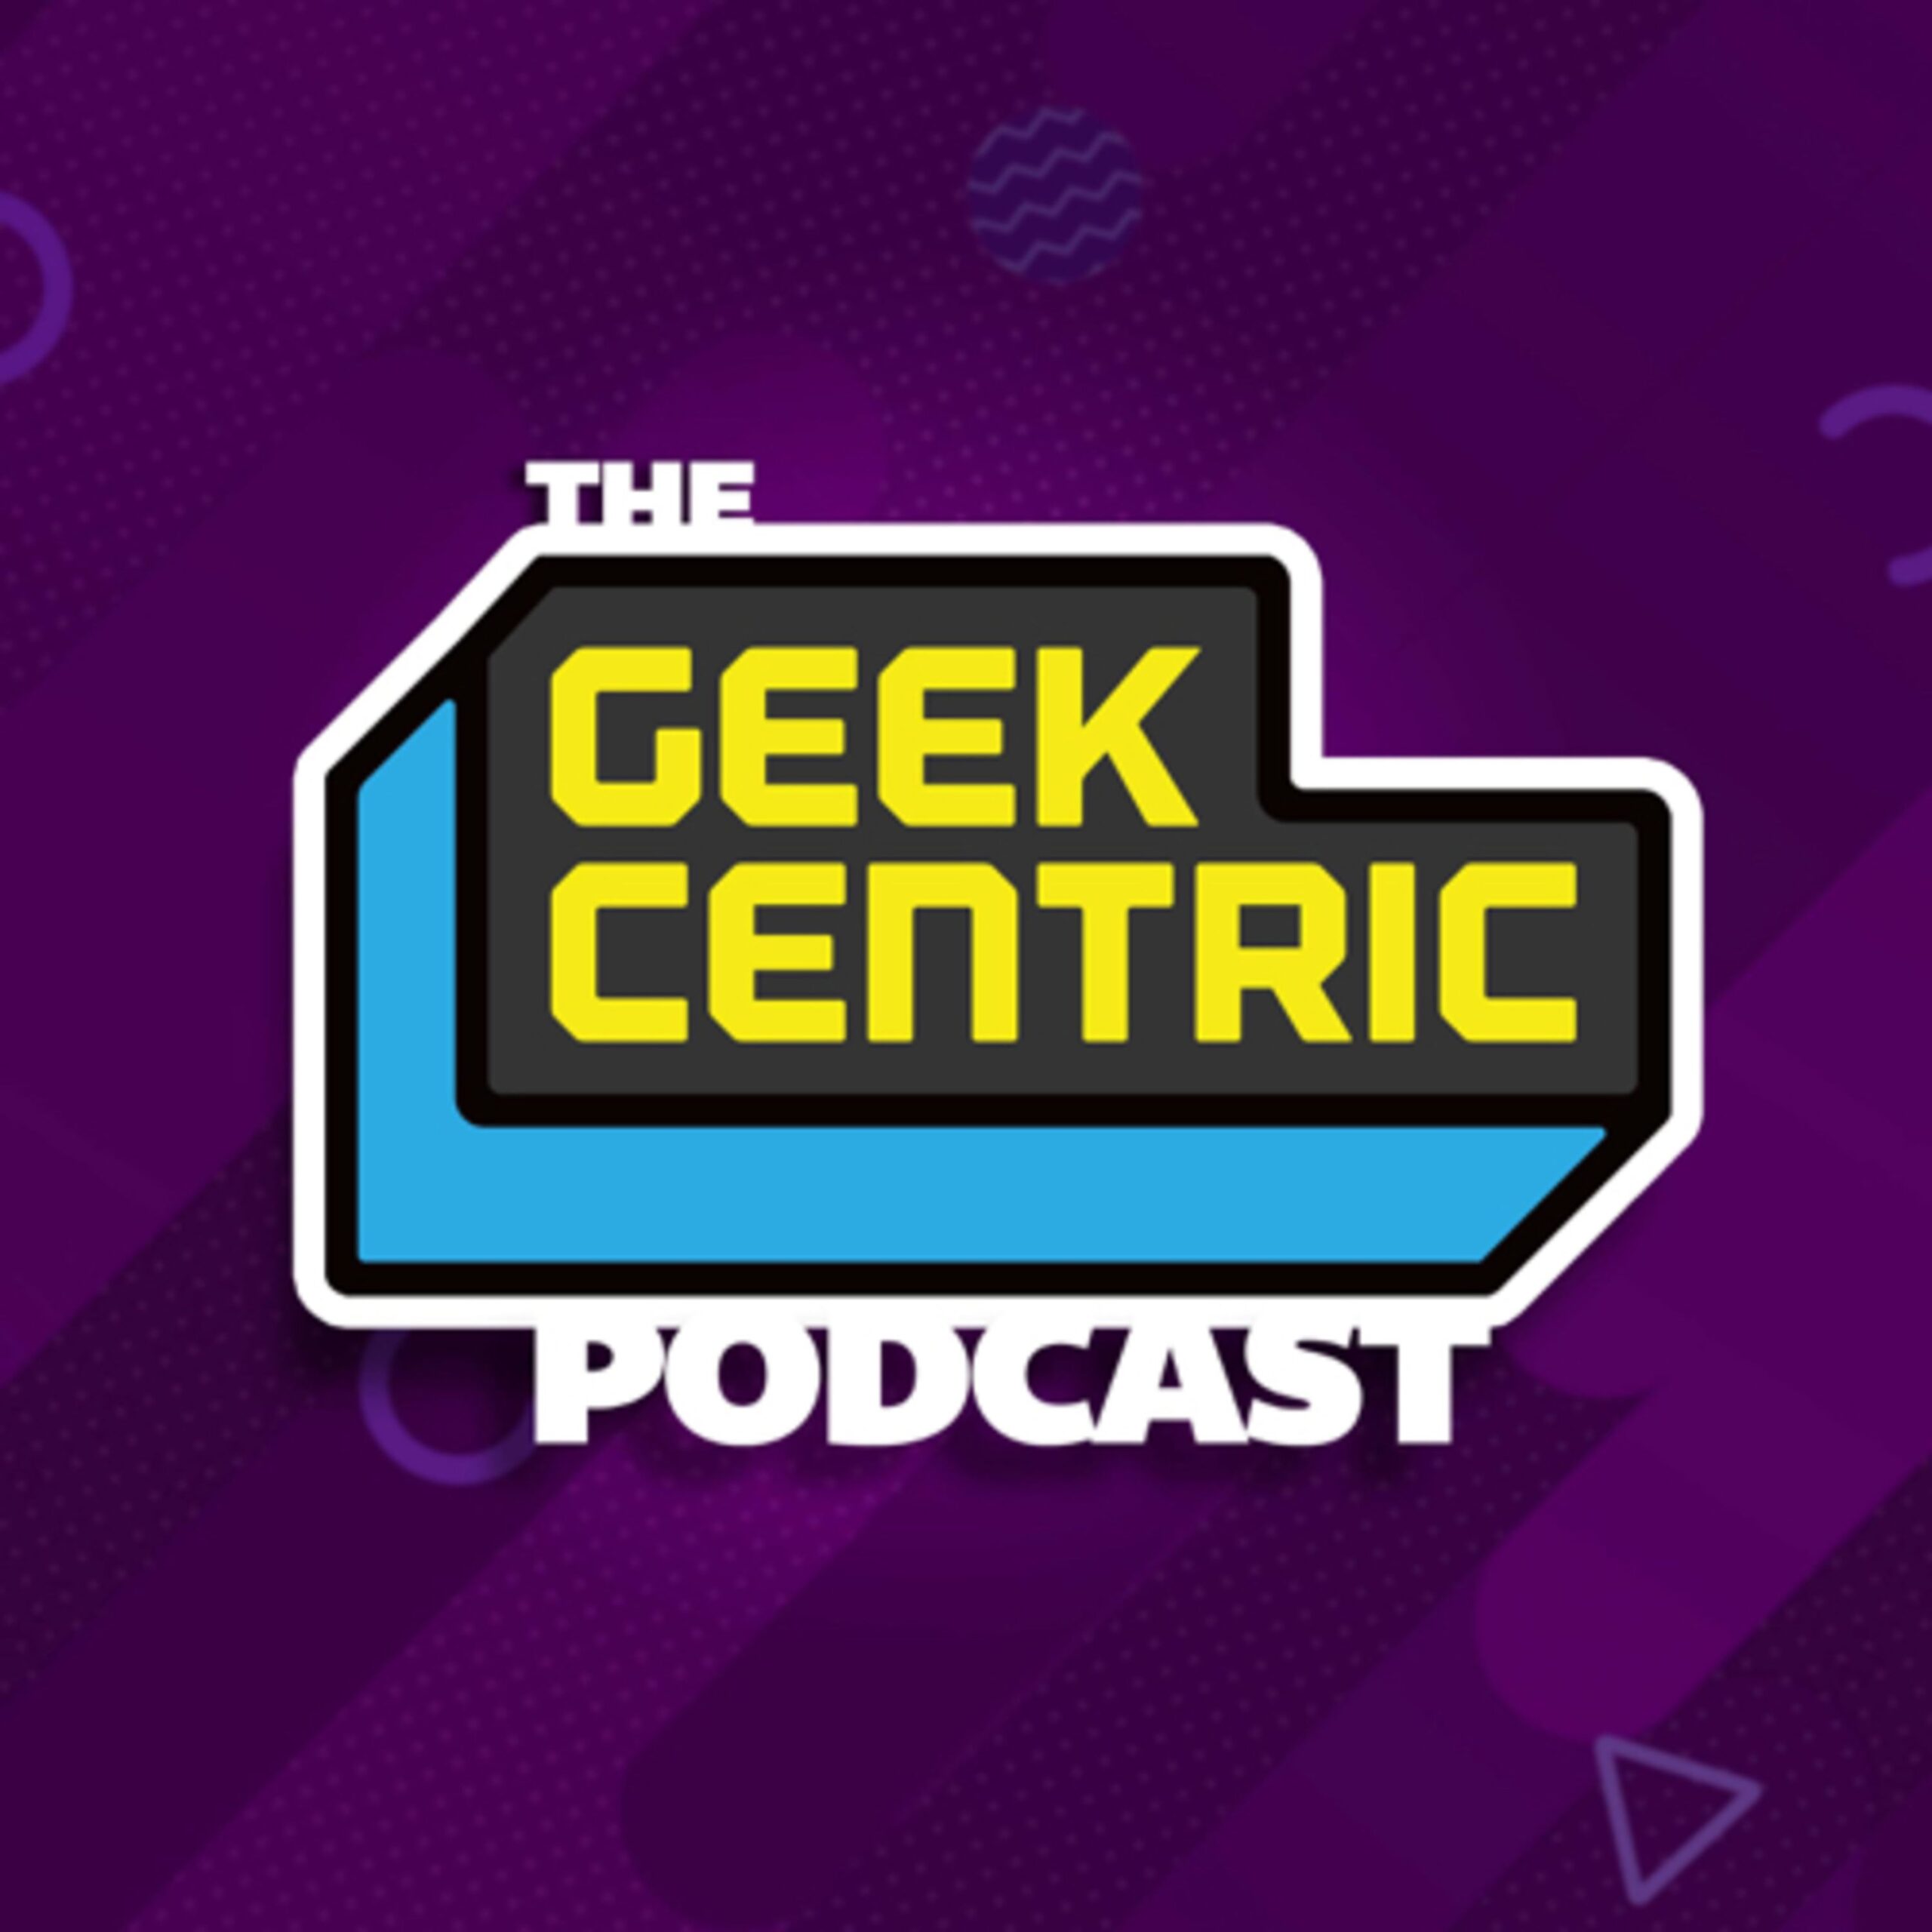 The Geekcentric Podcast